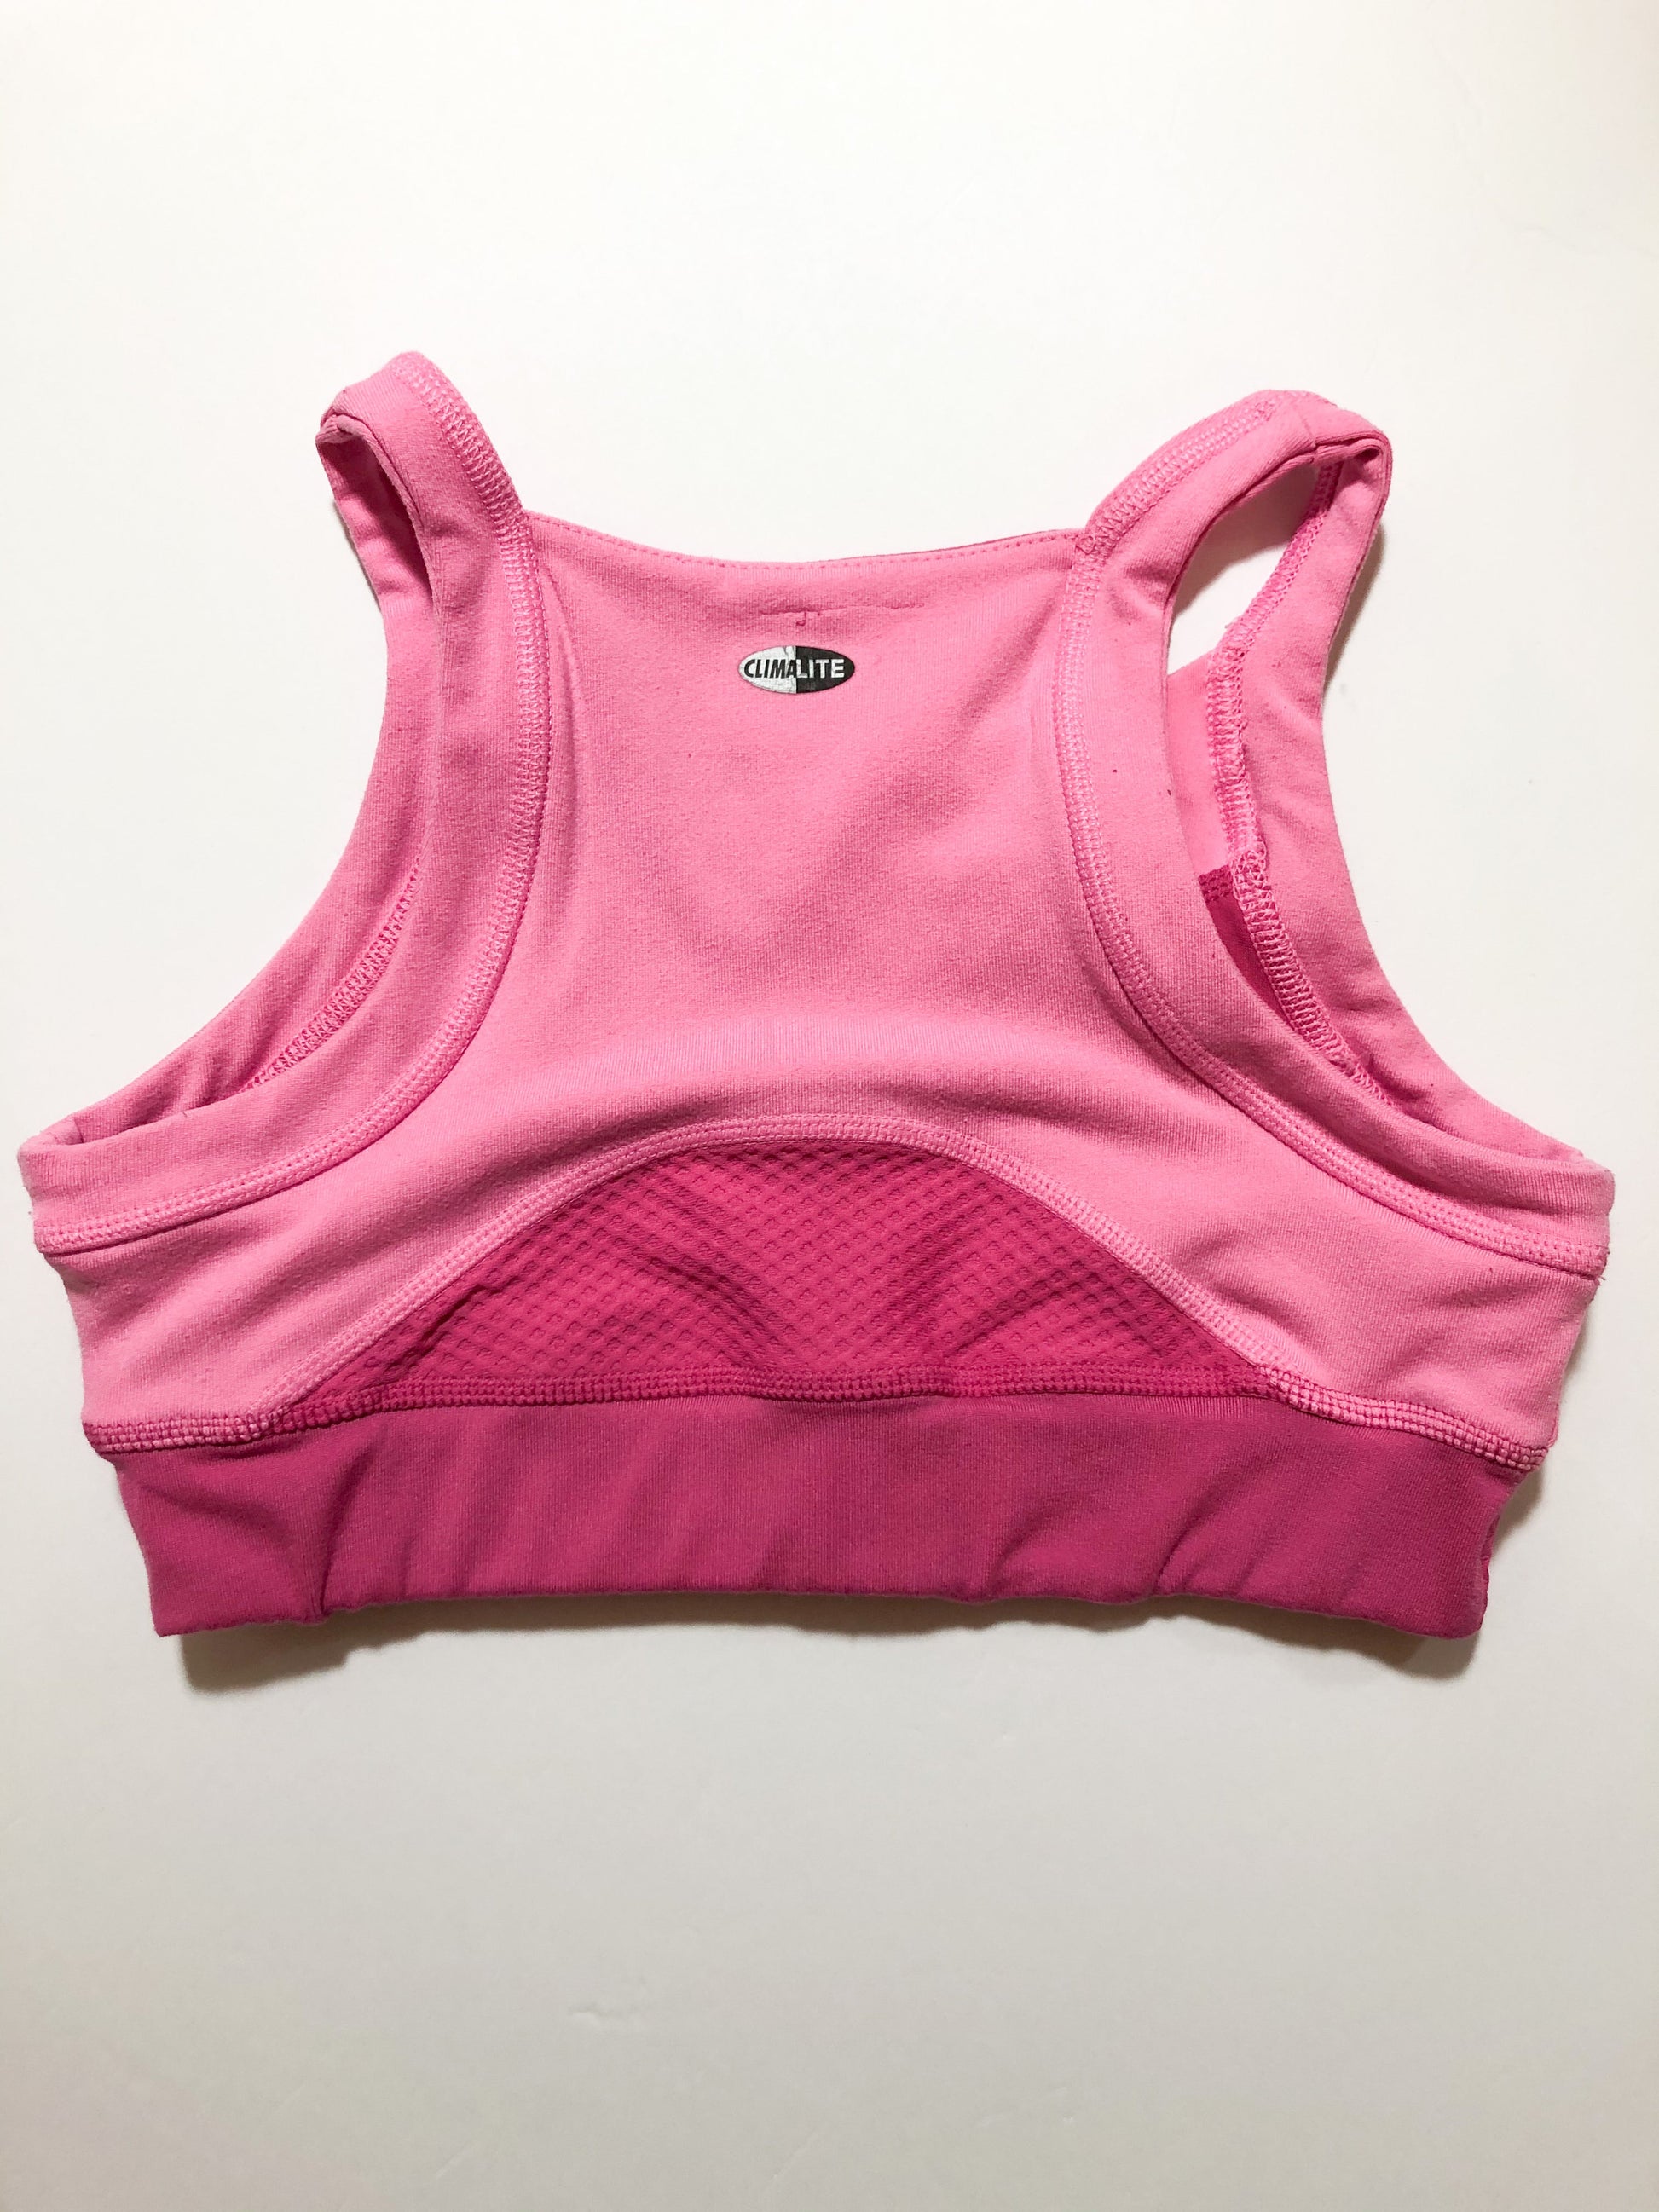 Adidas Pink High Neck Reversible Sports Bra - XS/S – Le Prix Fashion &  Consulting